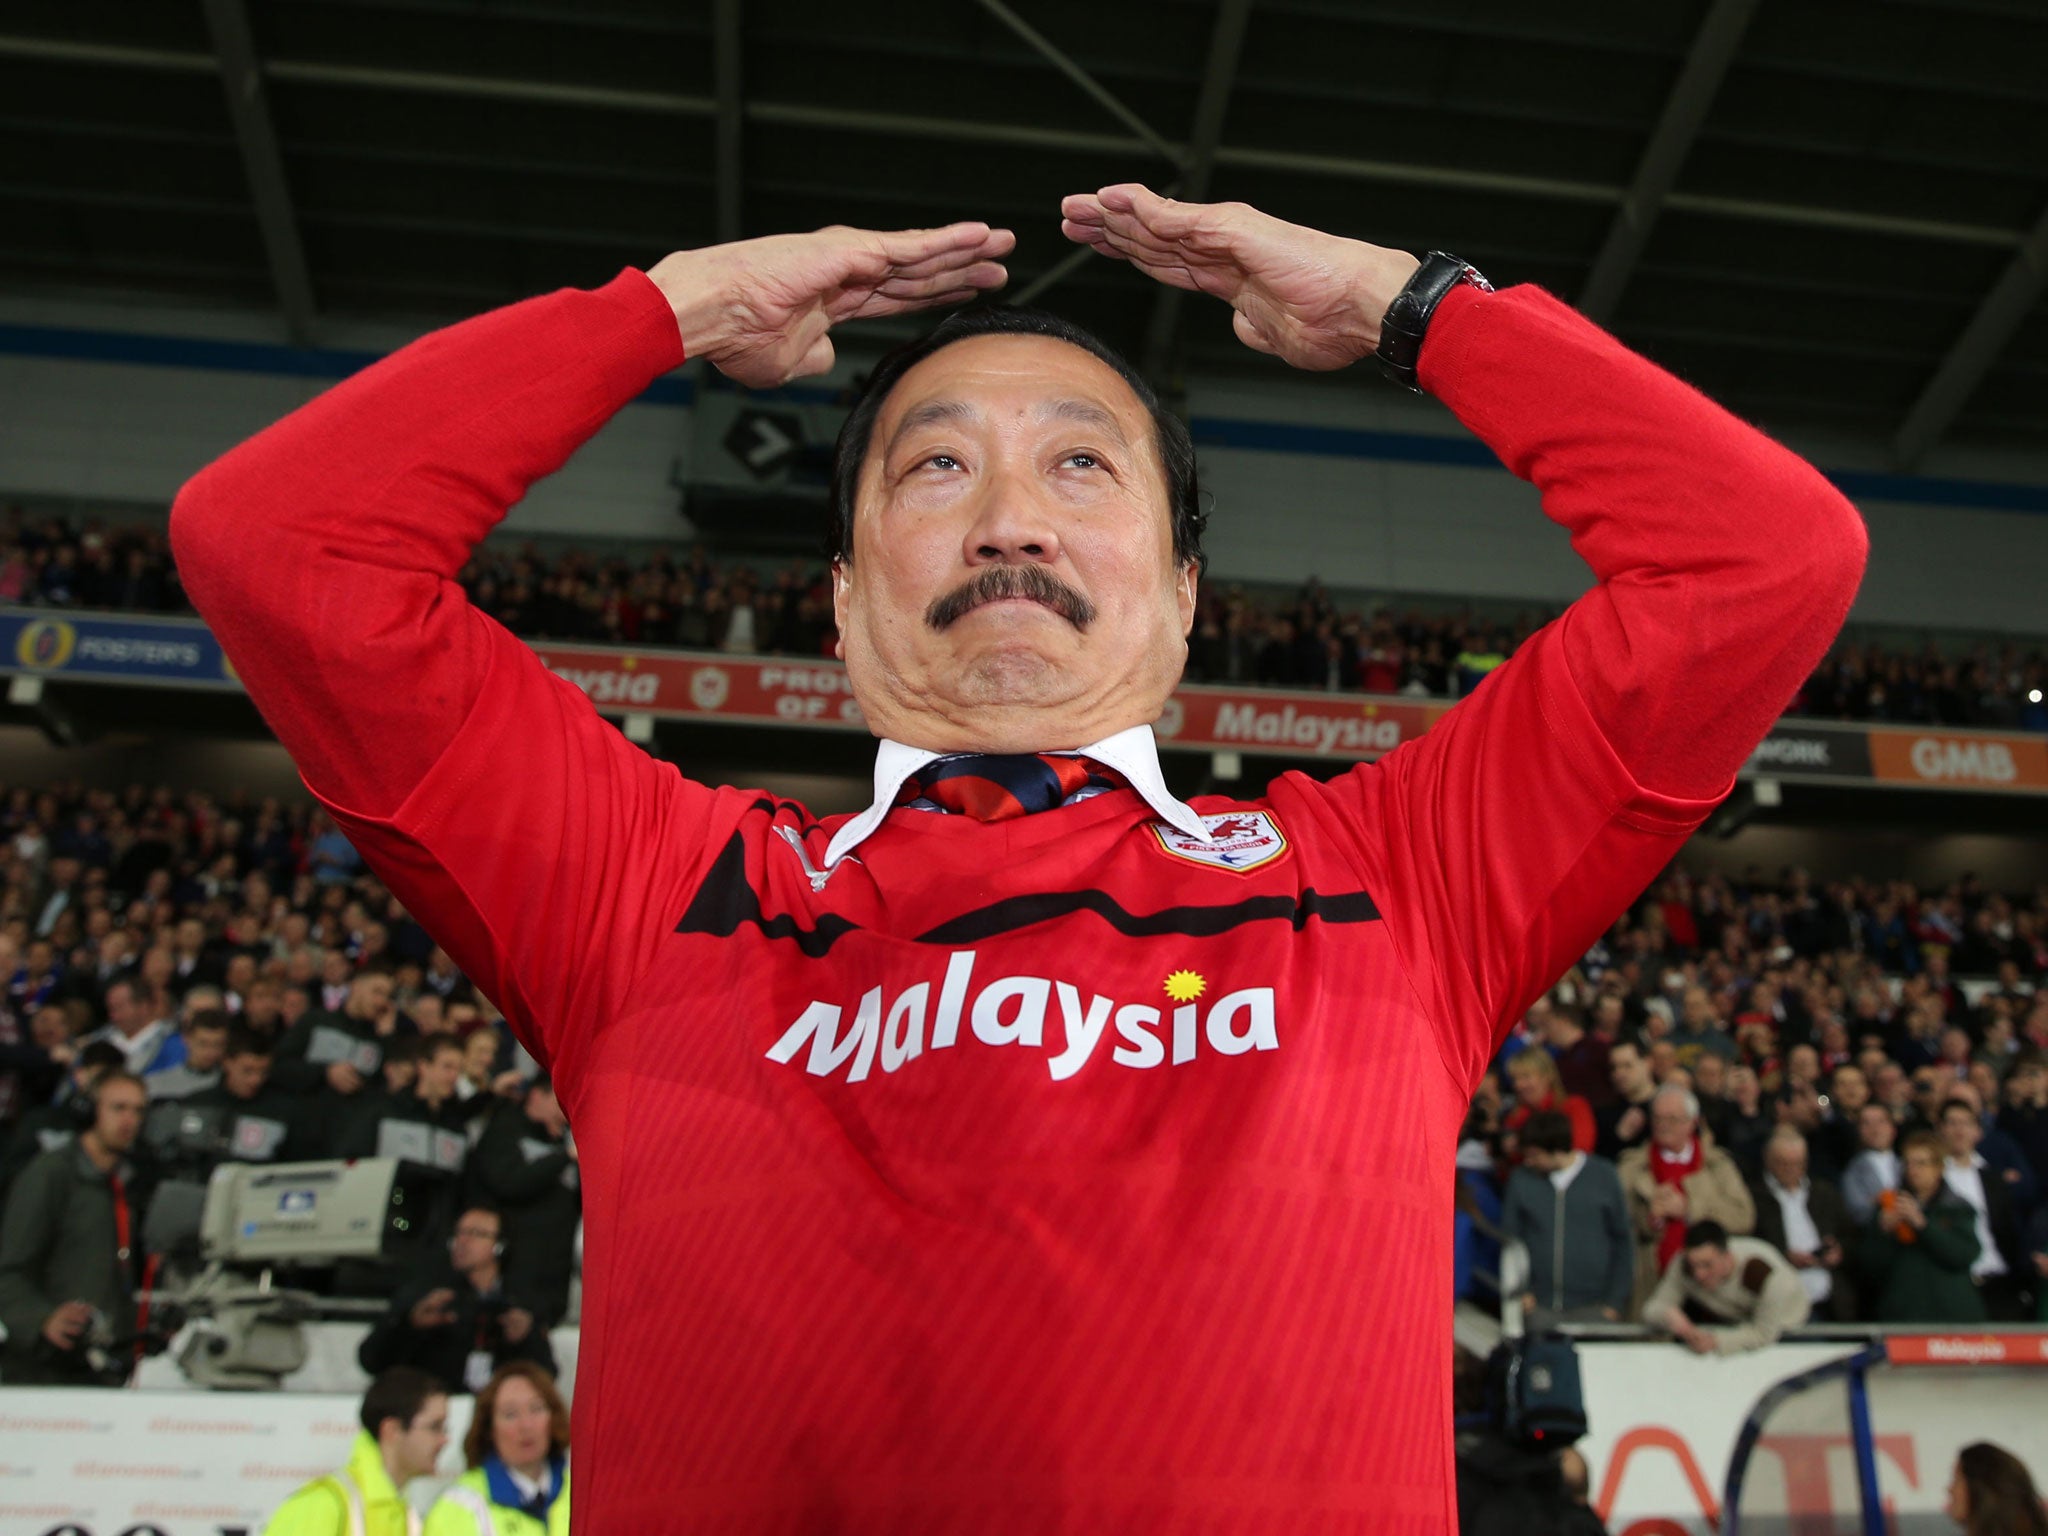 Cardiff supremo Vincent Tan is on the verge of firing his overachieving young manager Malky Mackay